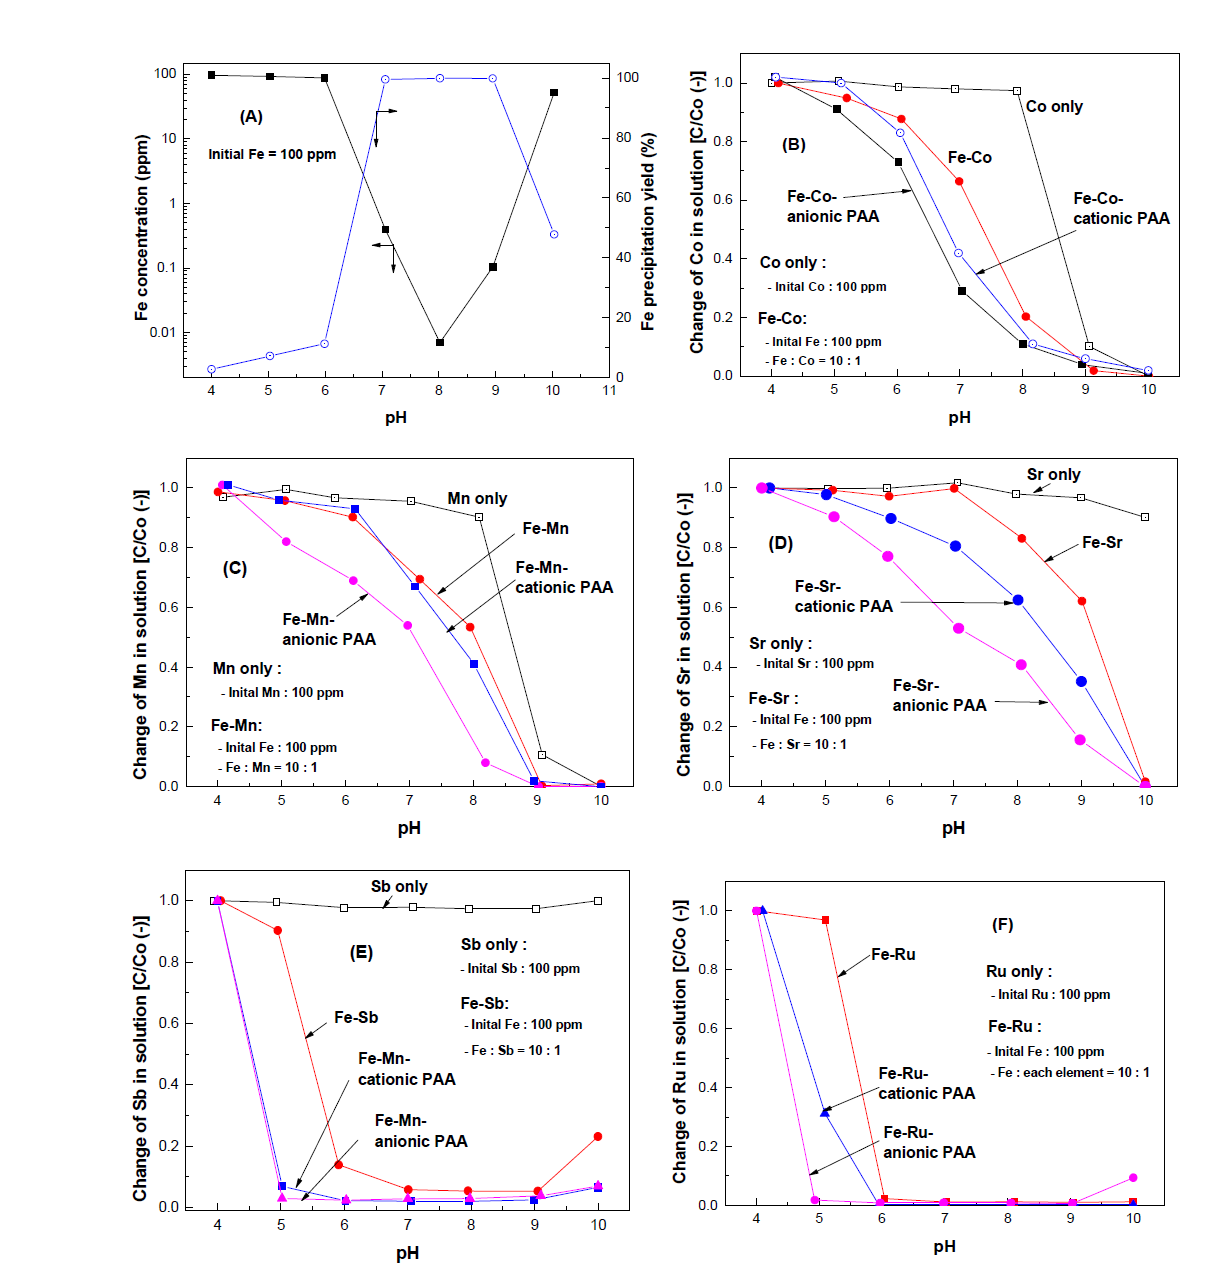 Changes of concentration of Fe (A) with pH in solution, and concentrations of Co (B), Mn (C), Sr (D), Sb(E), and Ru (F) in solutions with and without ferric ion or PAA flocculants together with pH.